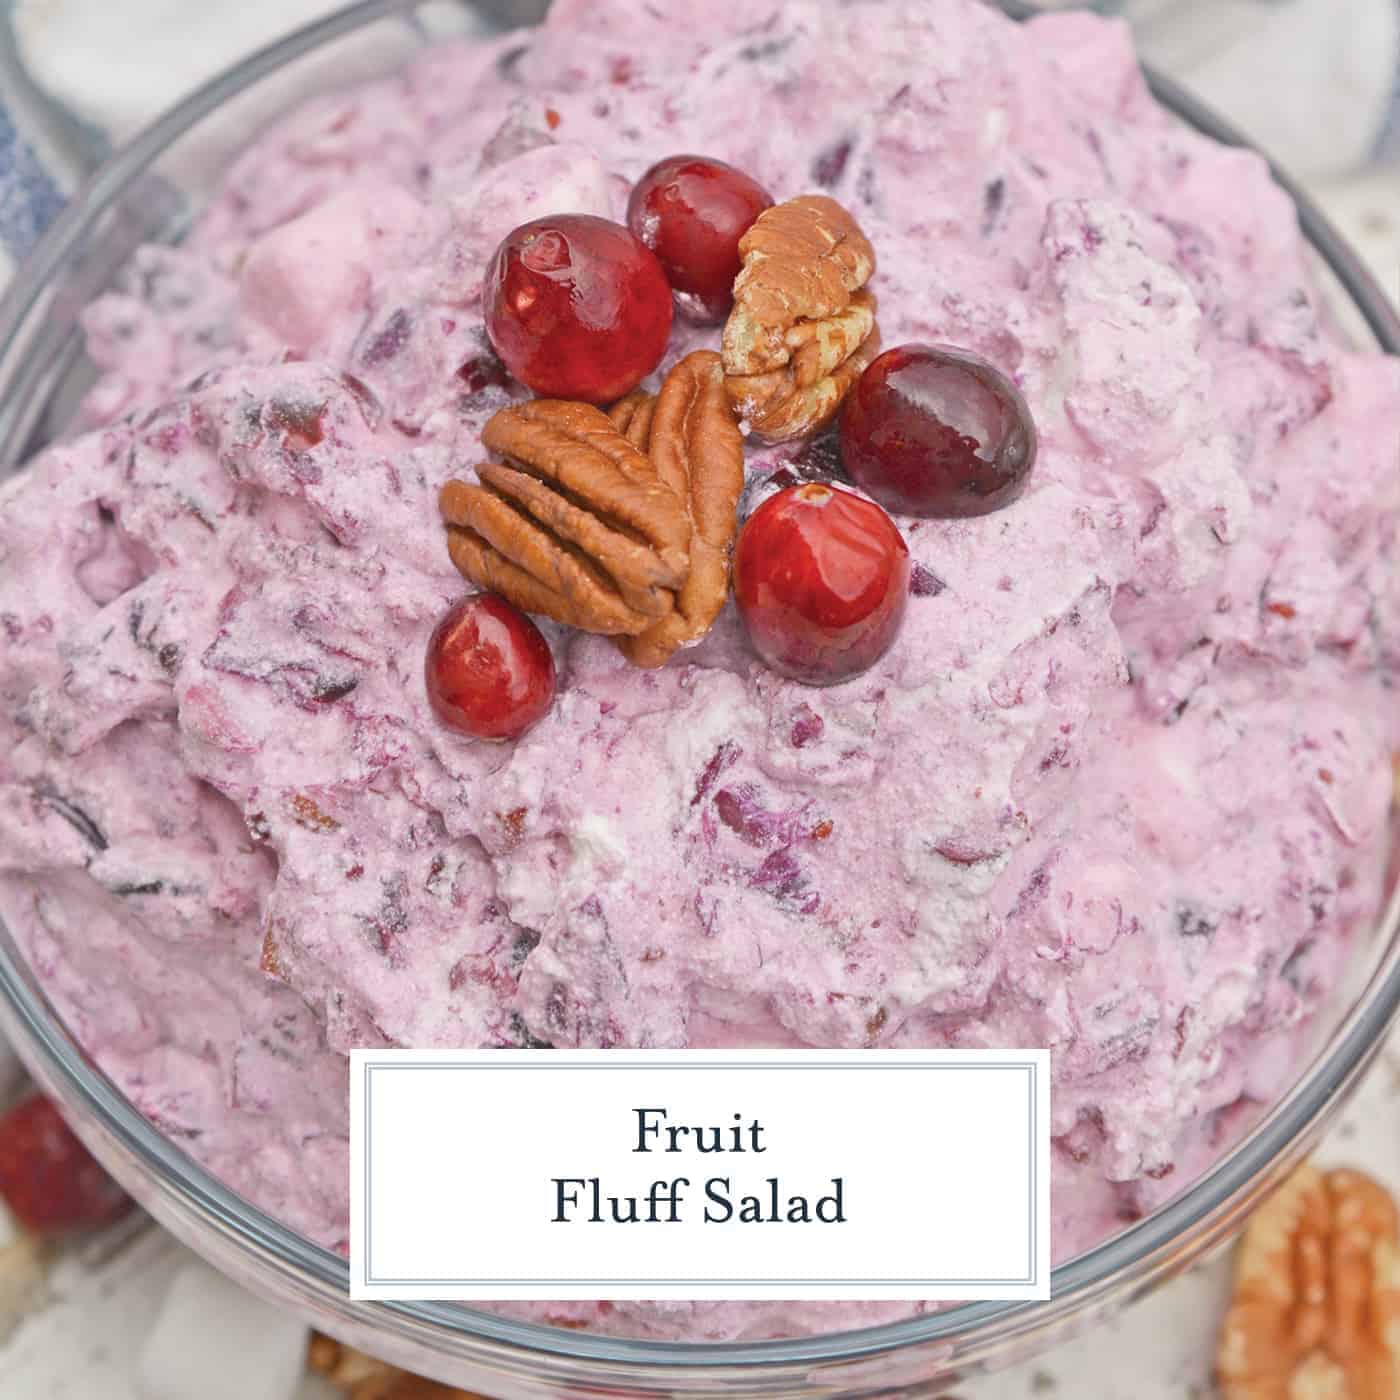 Fruit Fluff Salad is a classic side dish for the holidays combining Cherry Fluff, Pineapple Fluff and Cranberry Fluff Salad into one! #fruitfluffsalad #fluffsaladrecipe www.savoryexperiments.com 